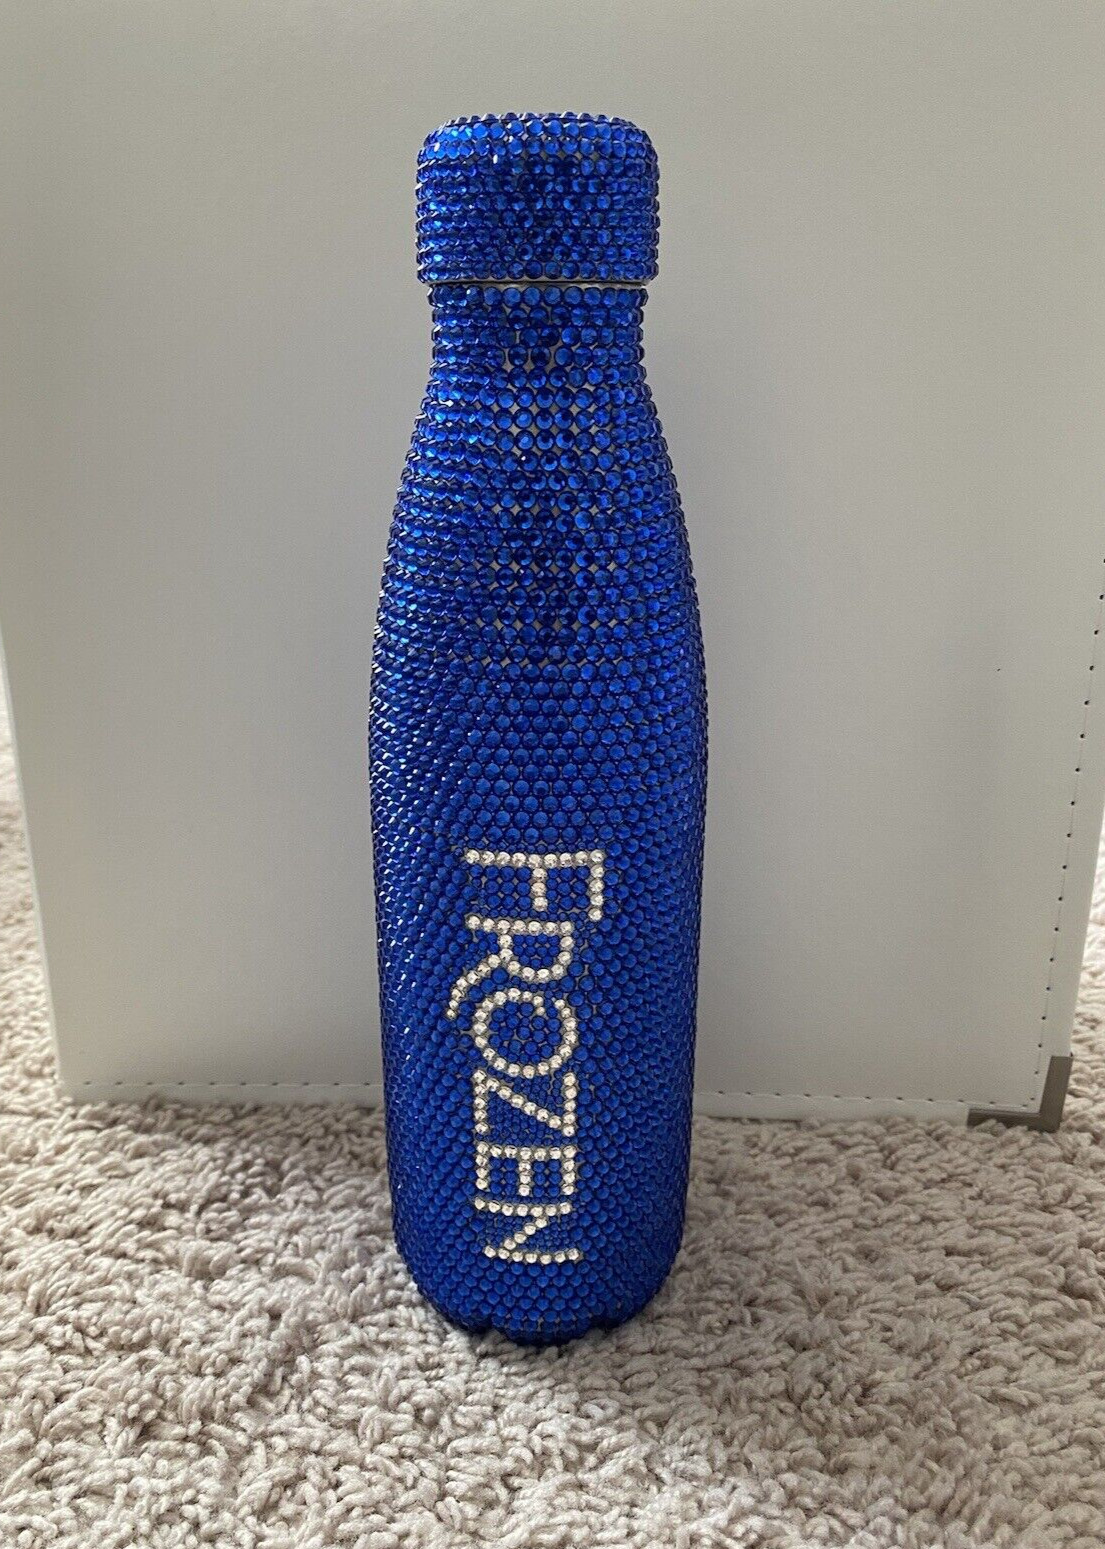 NEW Disney Frozen the Musical Rhinestone Jeweled Insulated Water Bottle